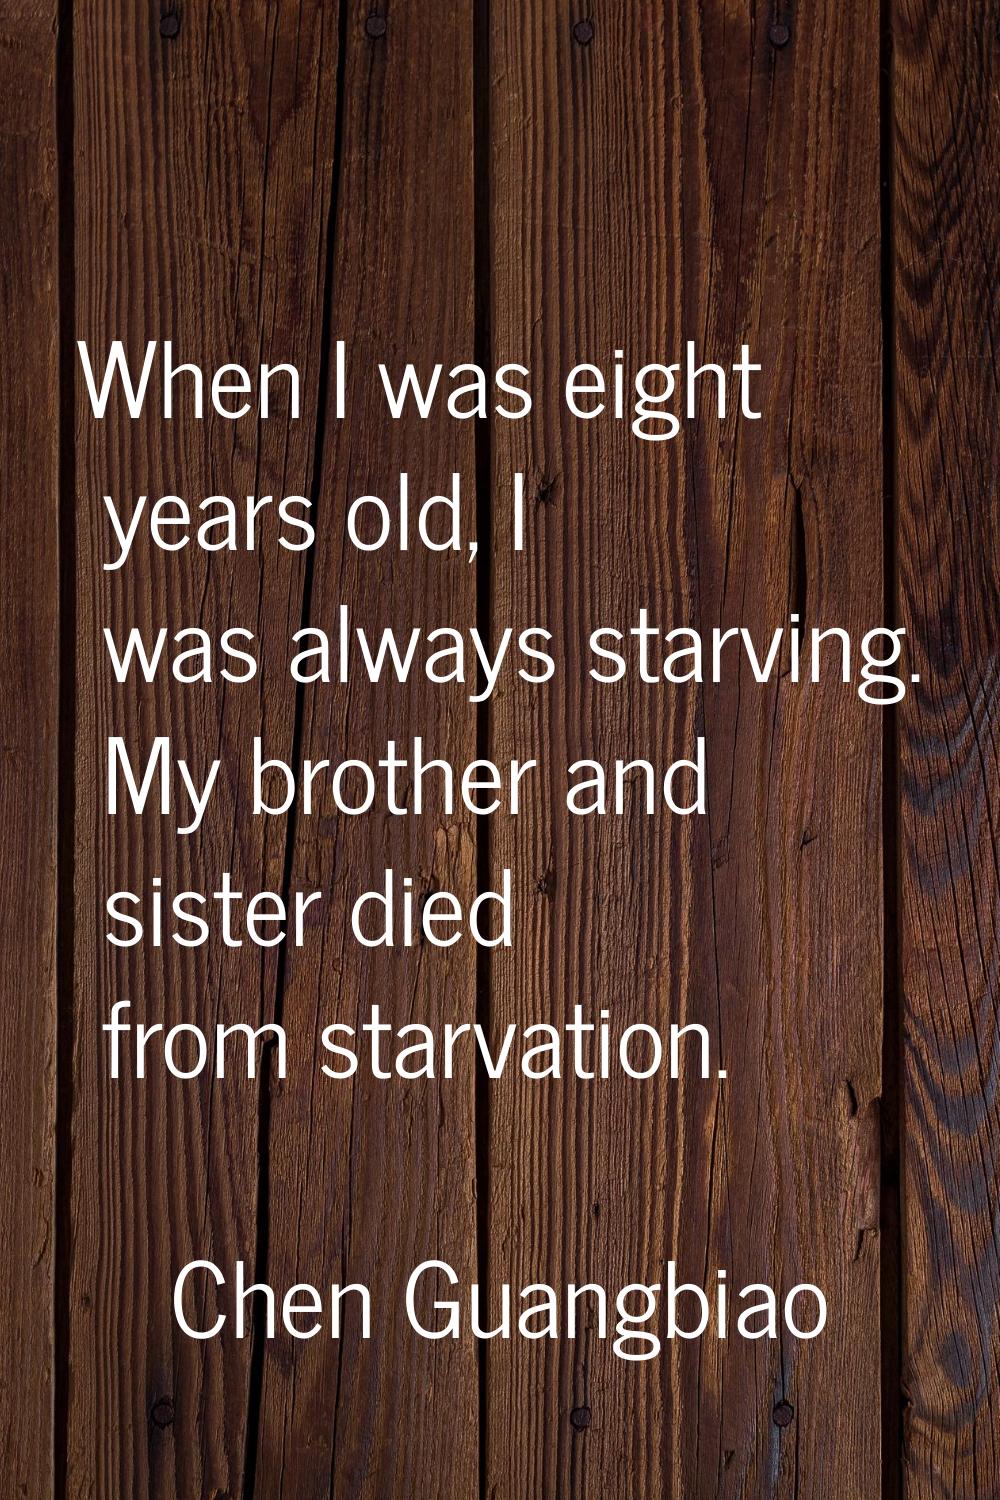 When I was eight years old, I was always starving. My brother and sister died from starvation.